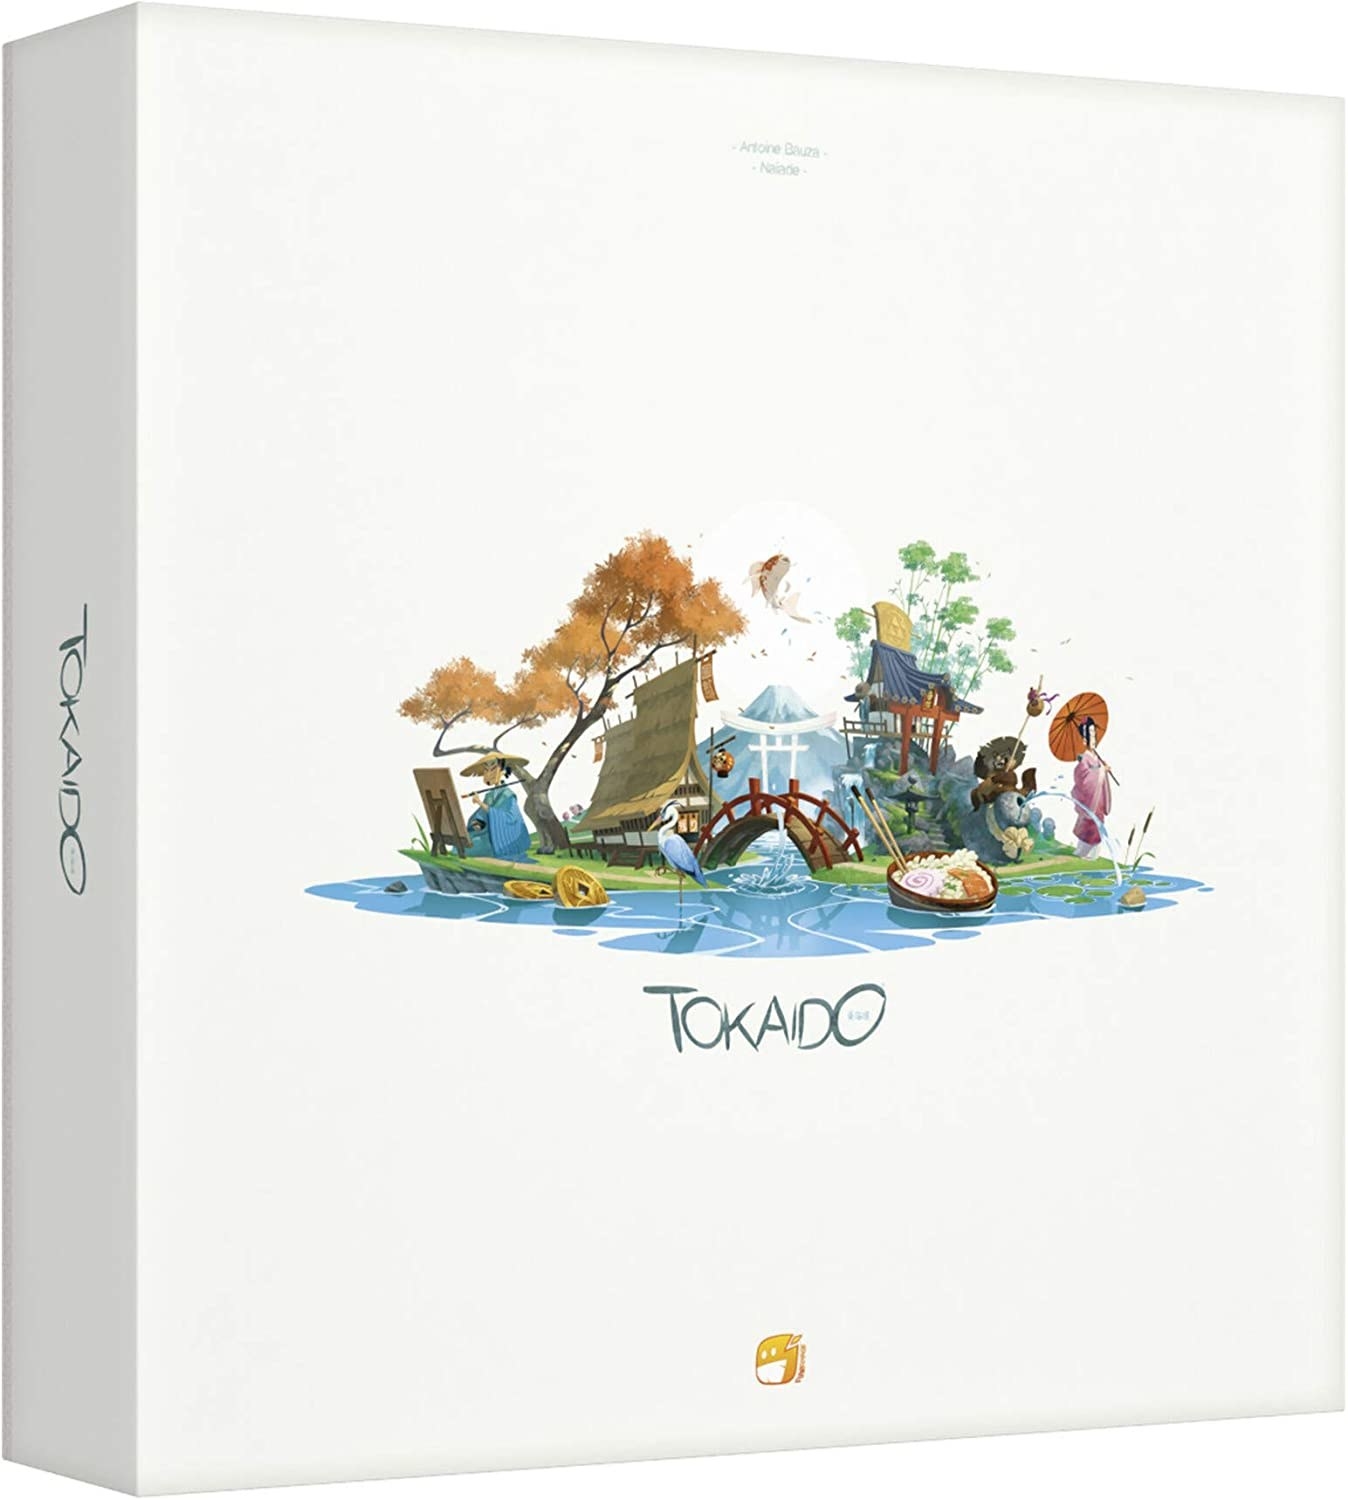 Tokaido promotional picture.